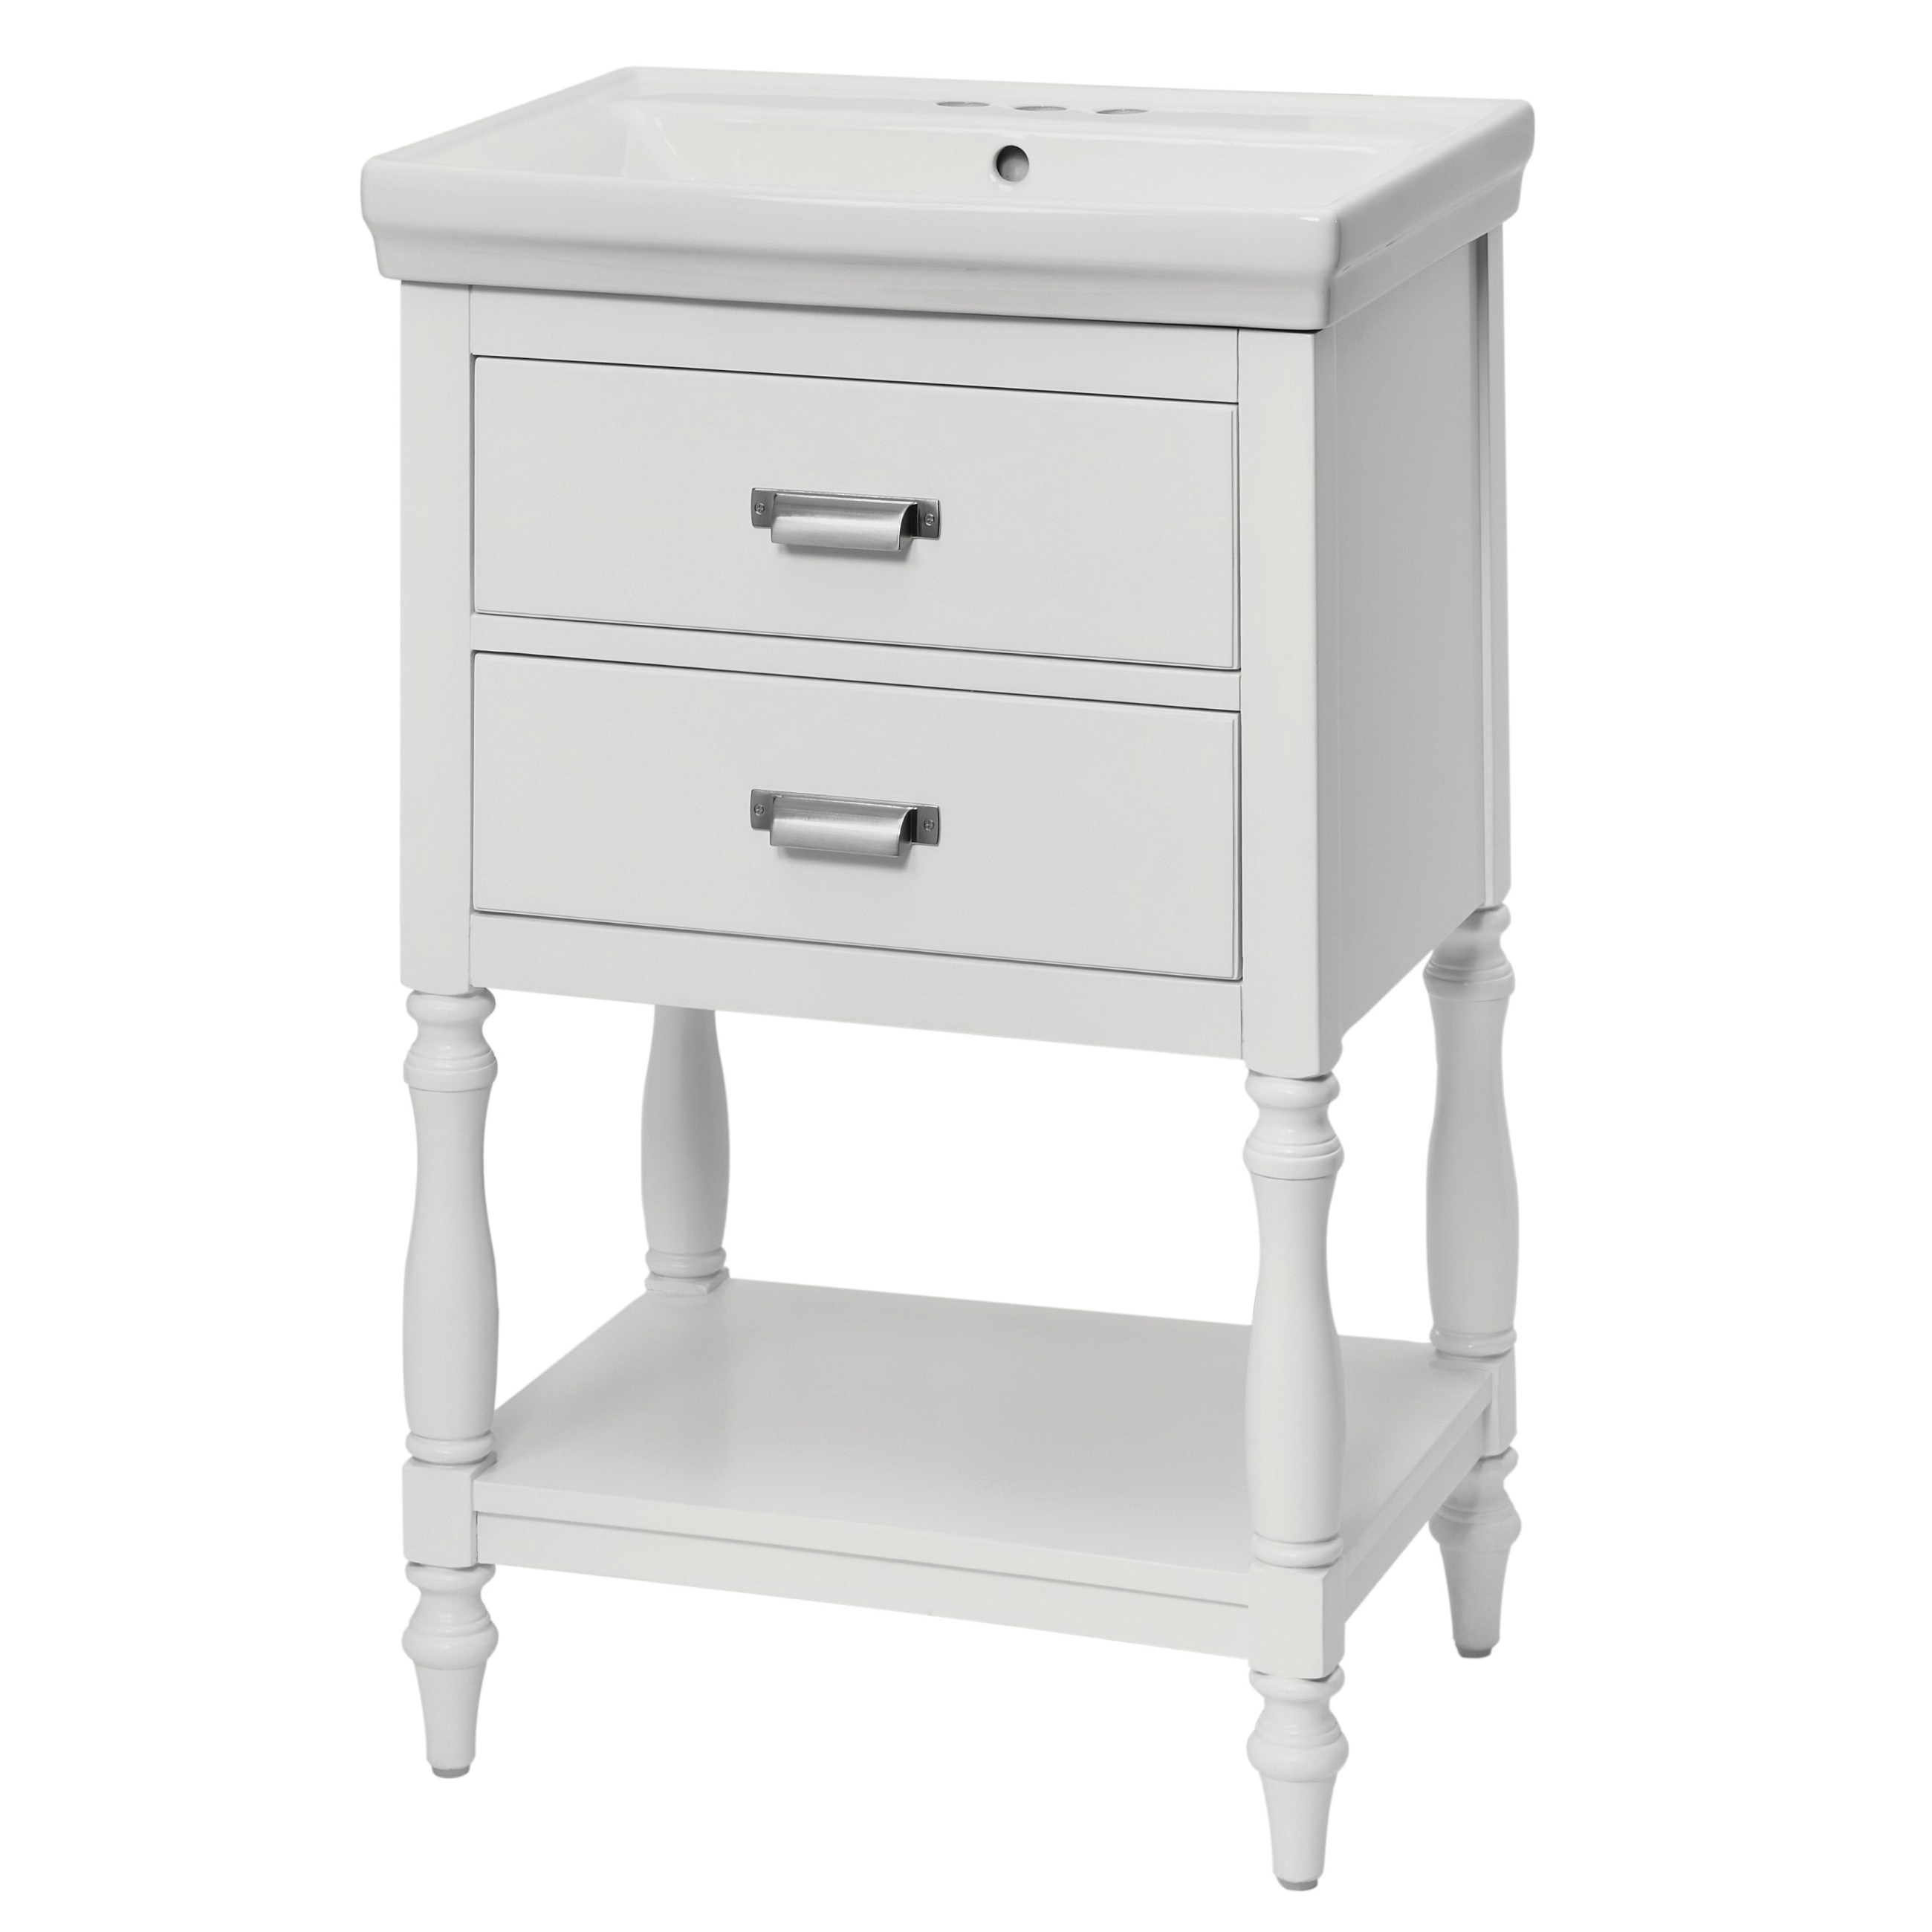 Cherie Series CHWVT2435 Vanity Combo, 22-1/8 in W Cabinet, 16-3/4 in D Cabinet, 32-5/8 in H Cabinet, White